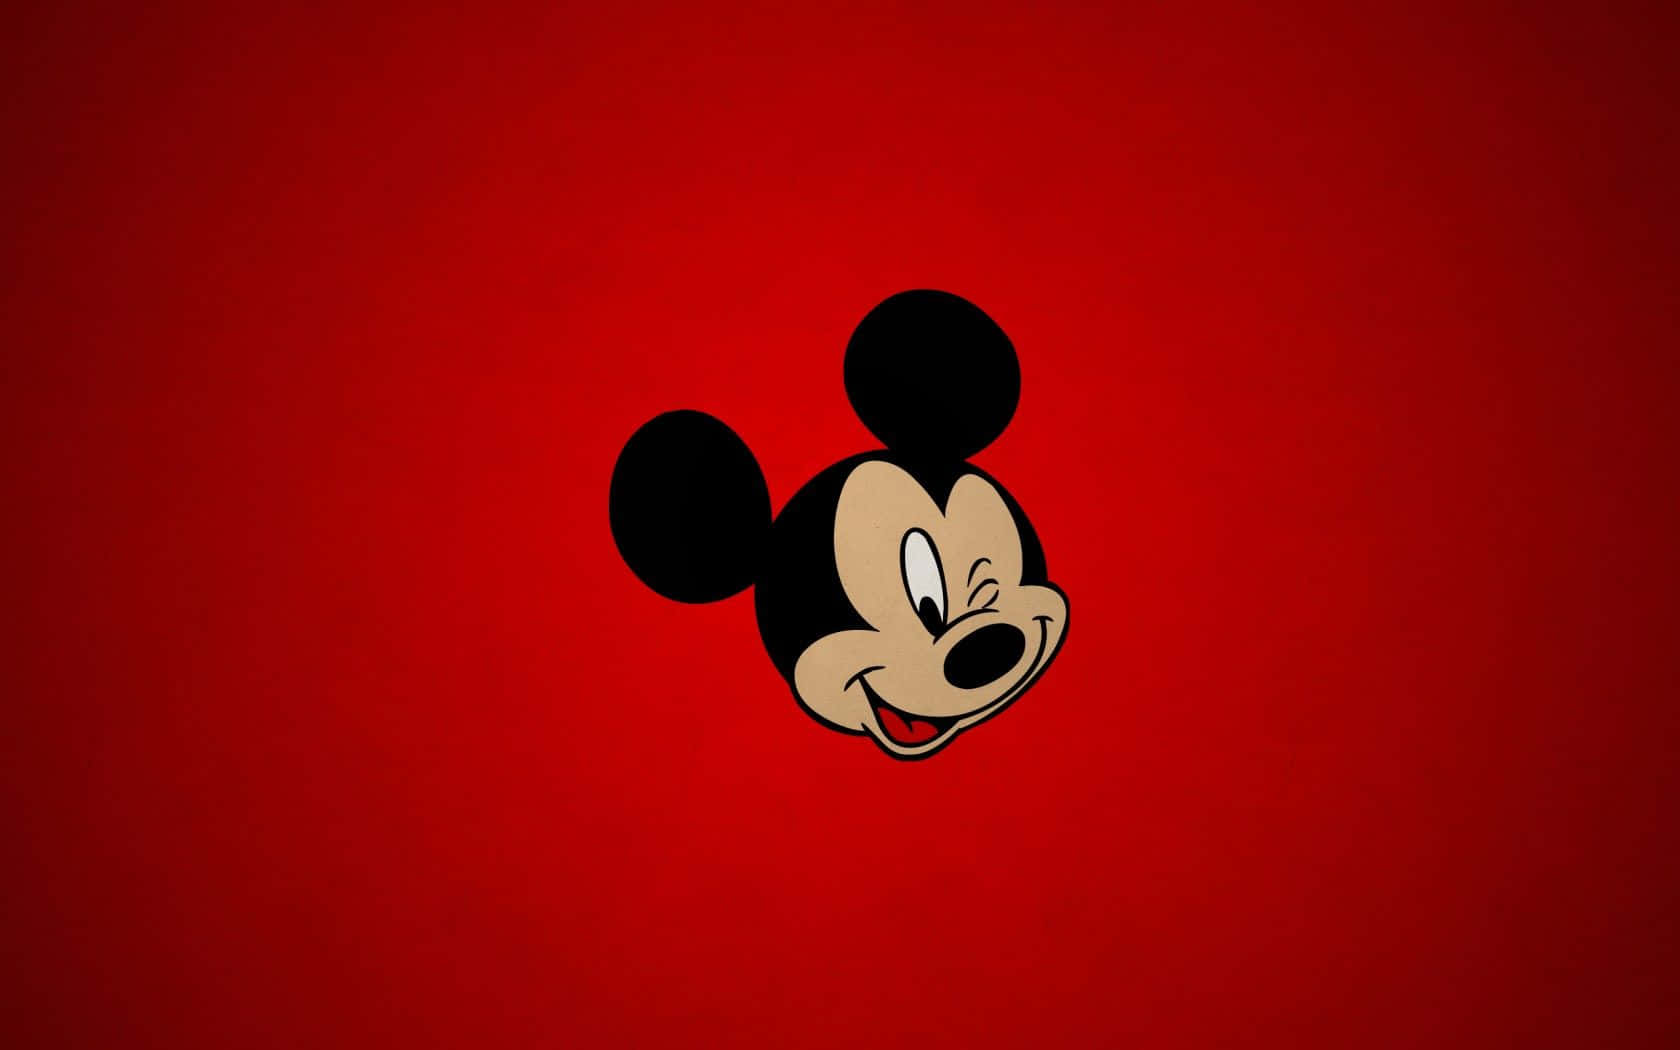 A cute Mickey Mouse cartoon shows the joyous character smiling brightly. Wallpaper